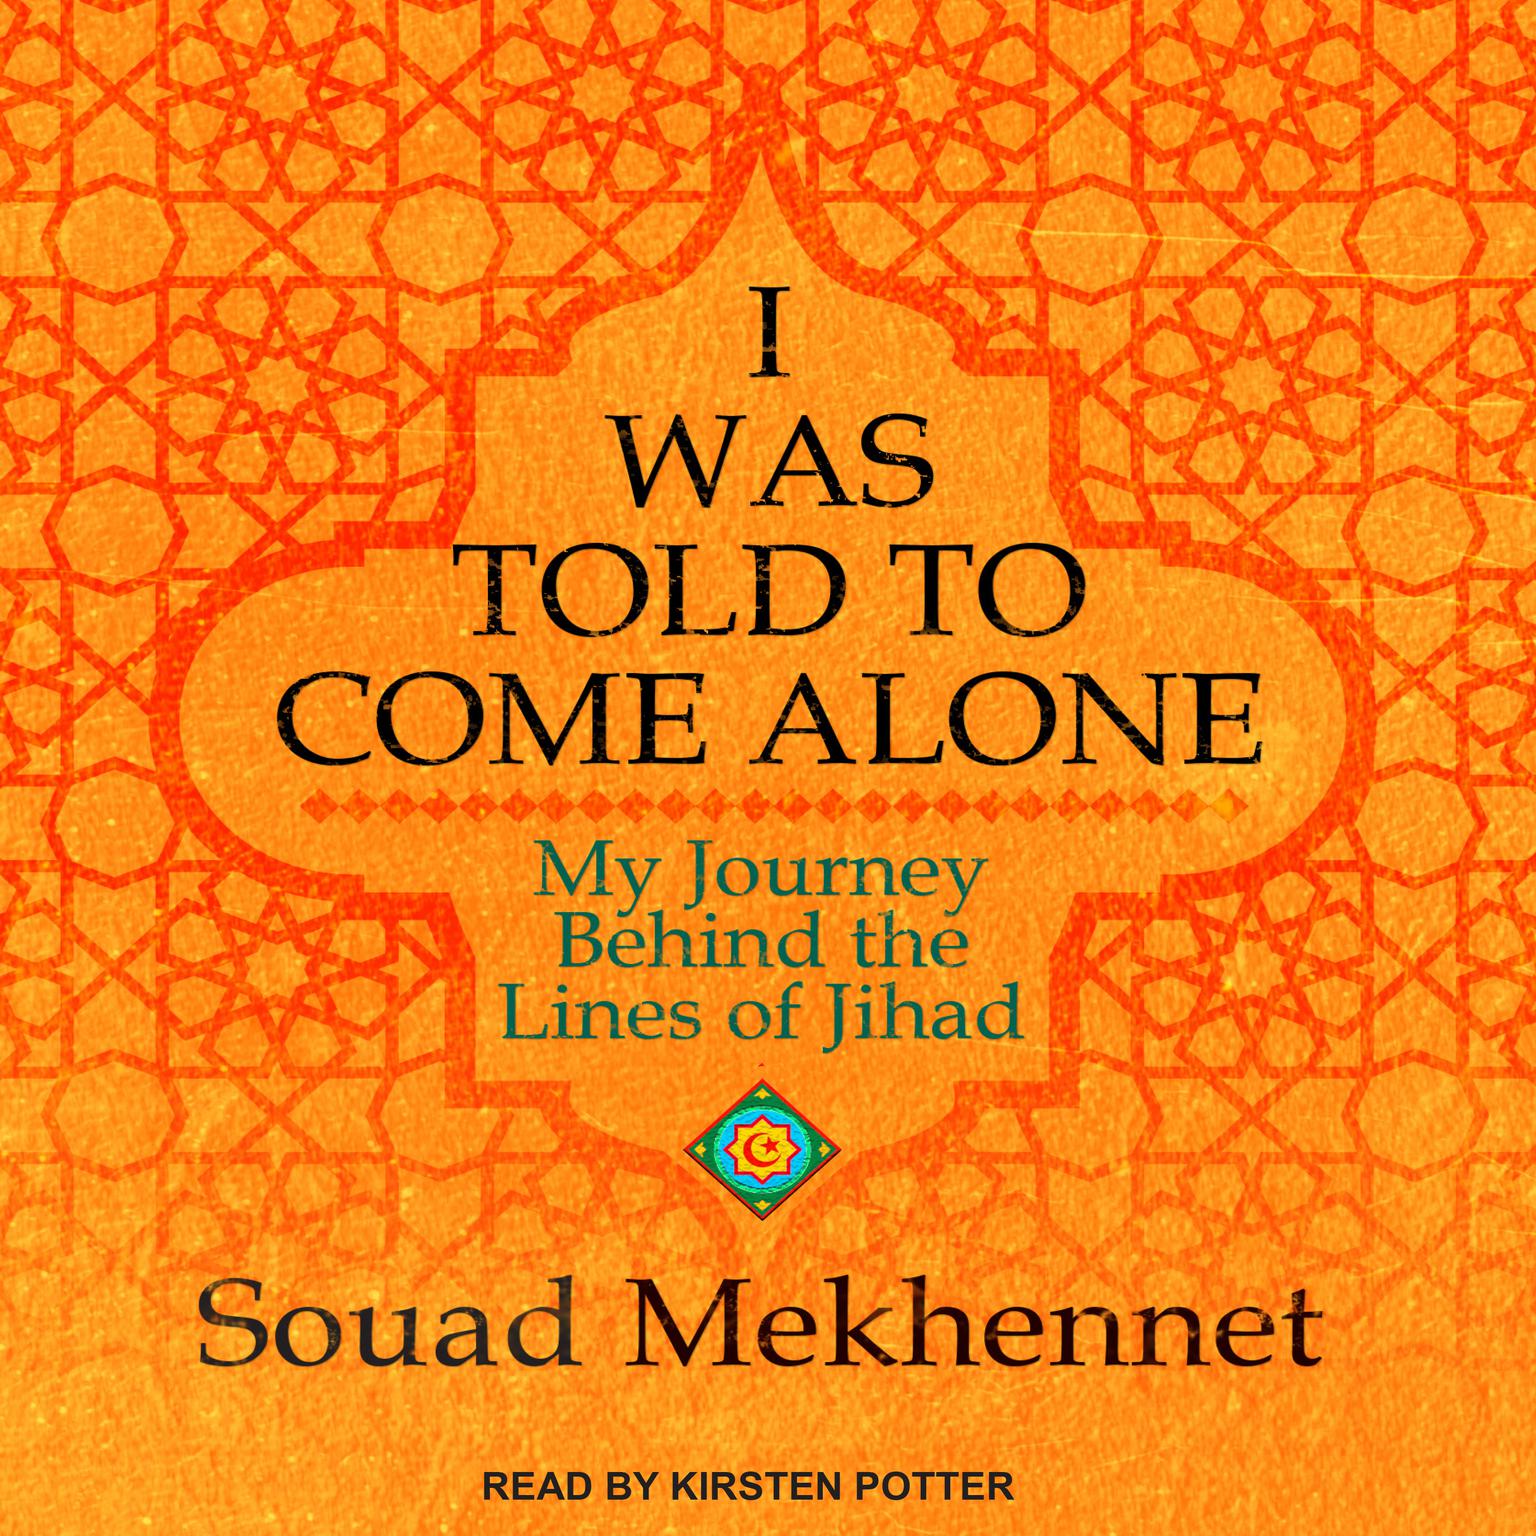 I Was Told to Come Alone: My Journey Behind the Lines of Jihad Audiobook, by Souad Mekhennet